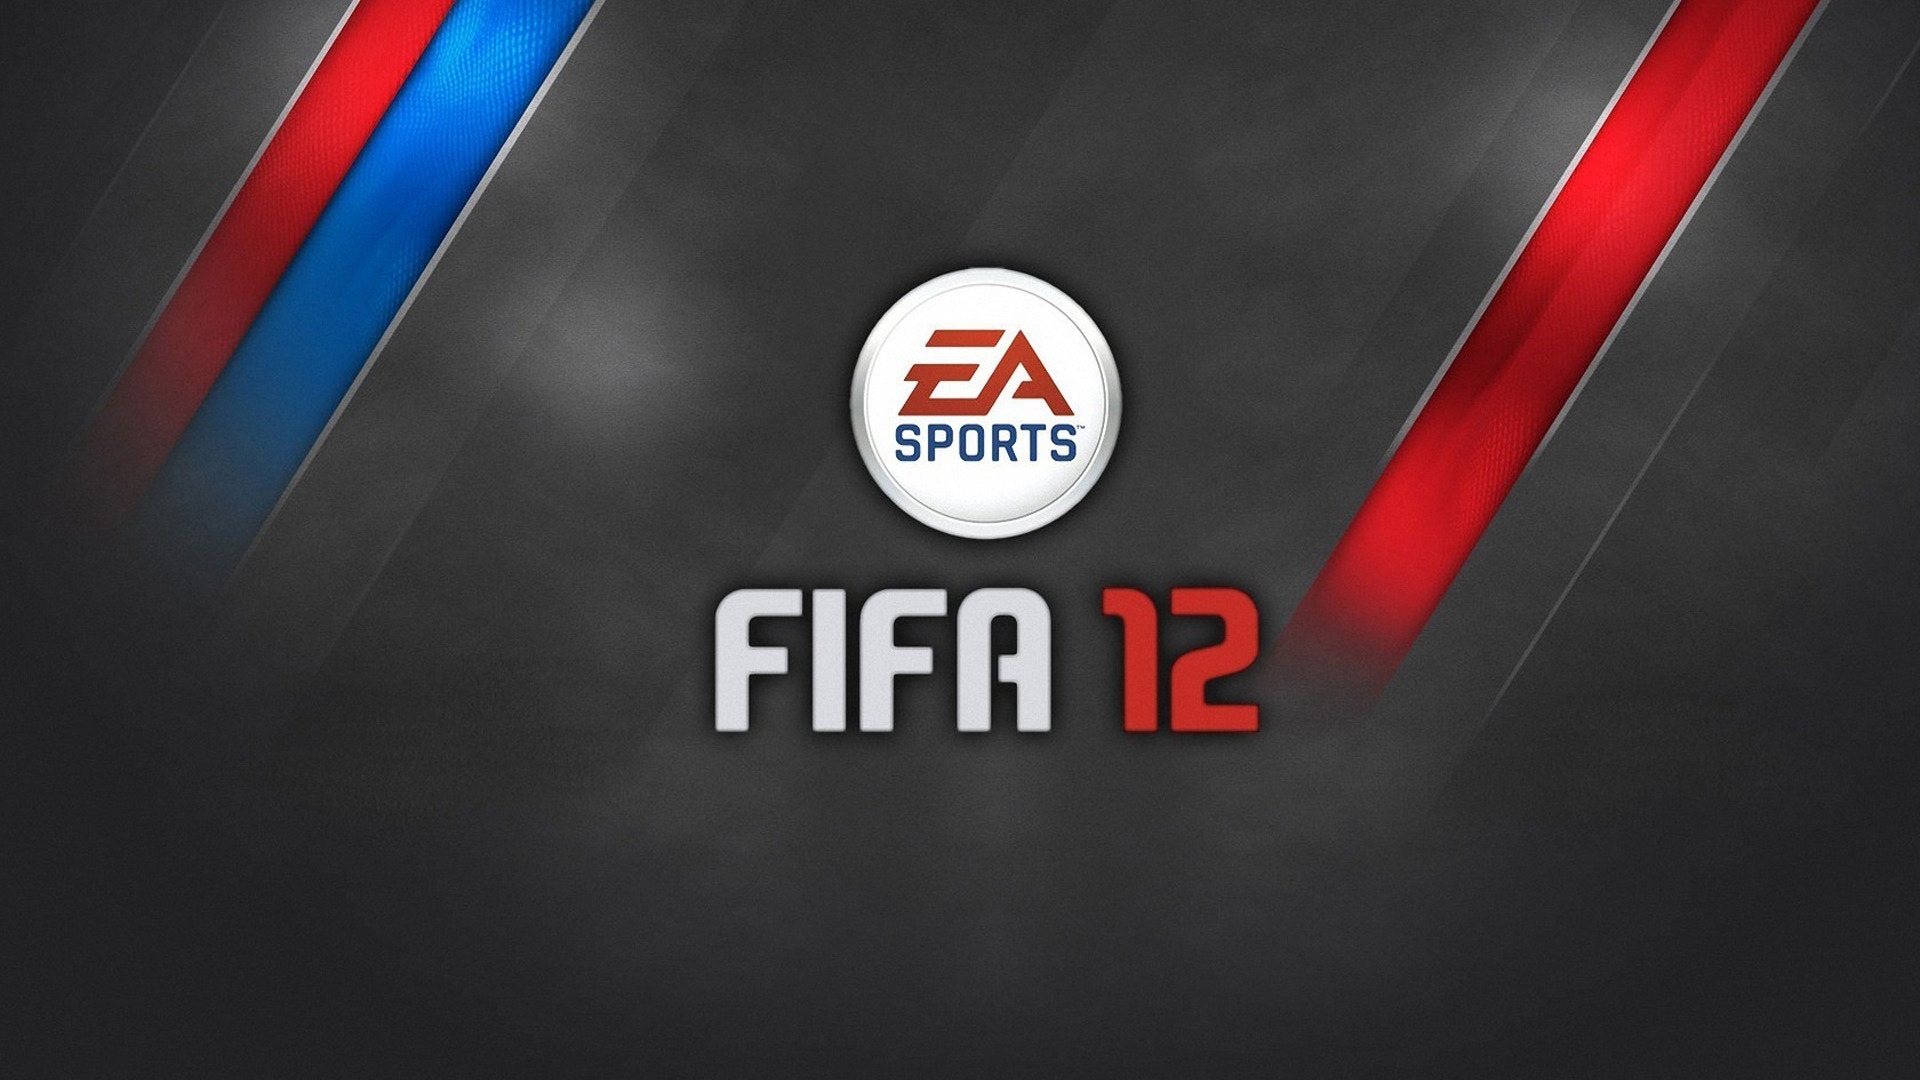 FIFA 12 for 1920 x 1080 HDTV 1080p resolution